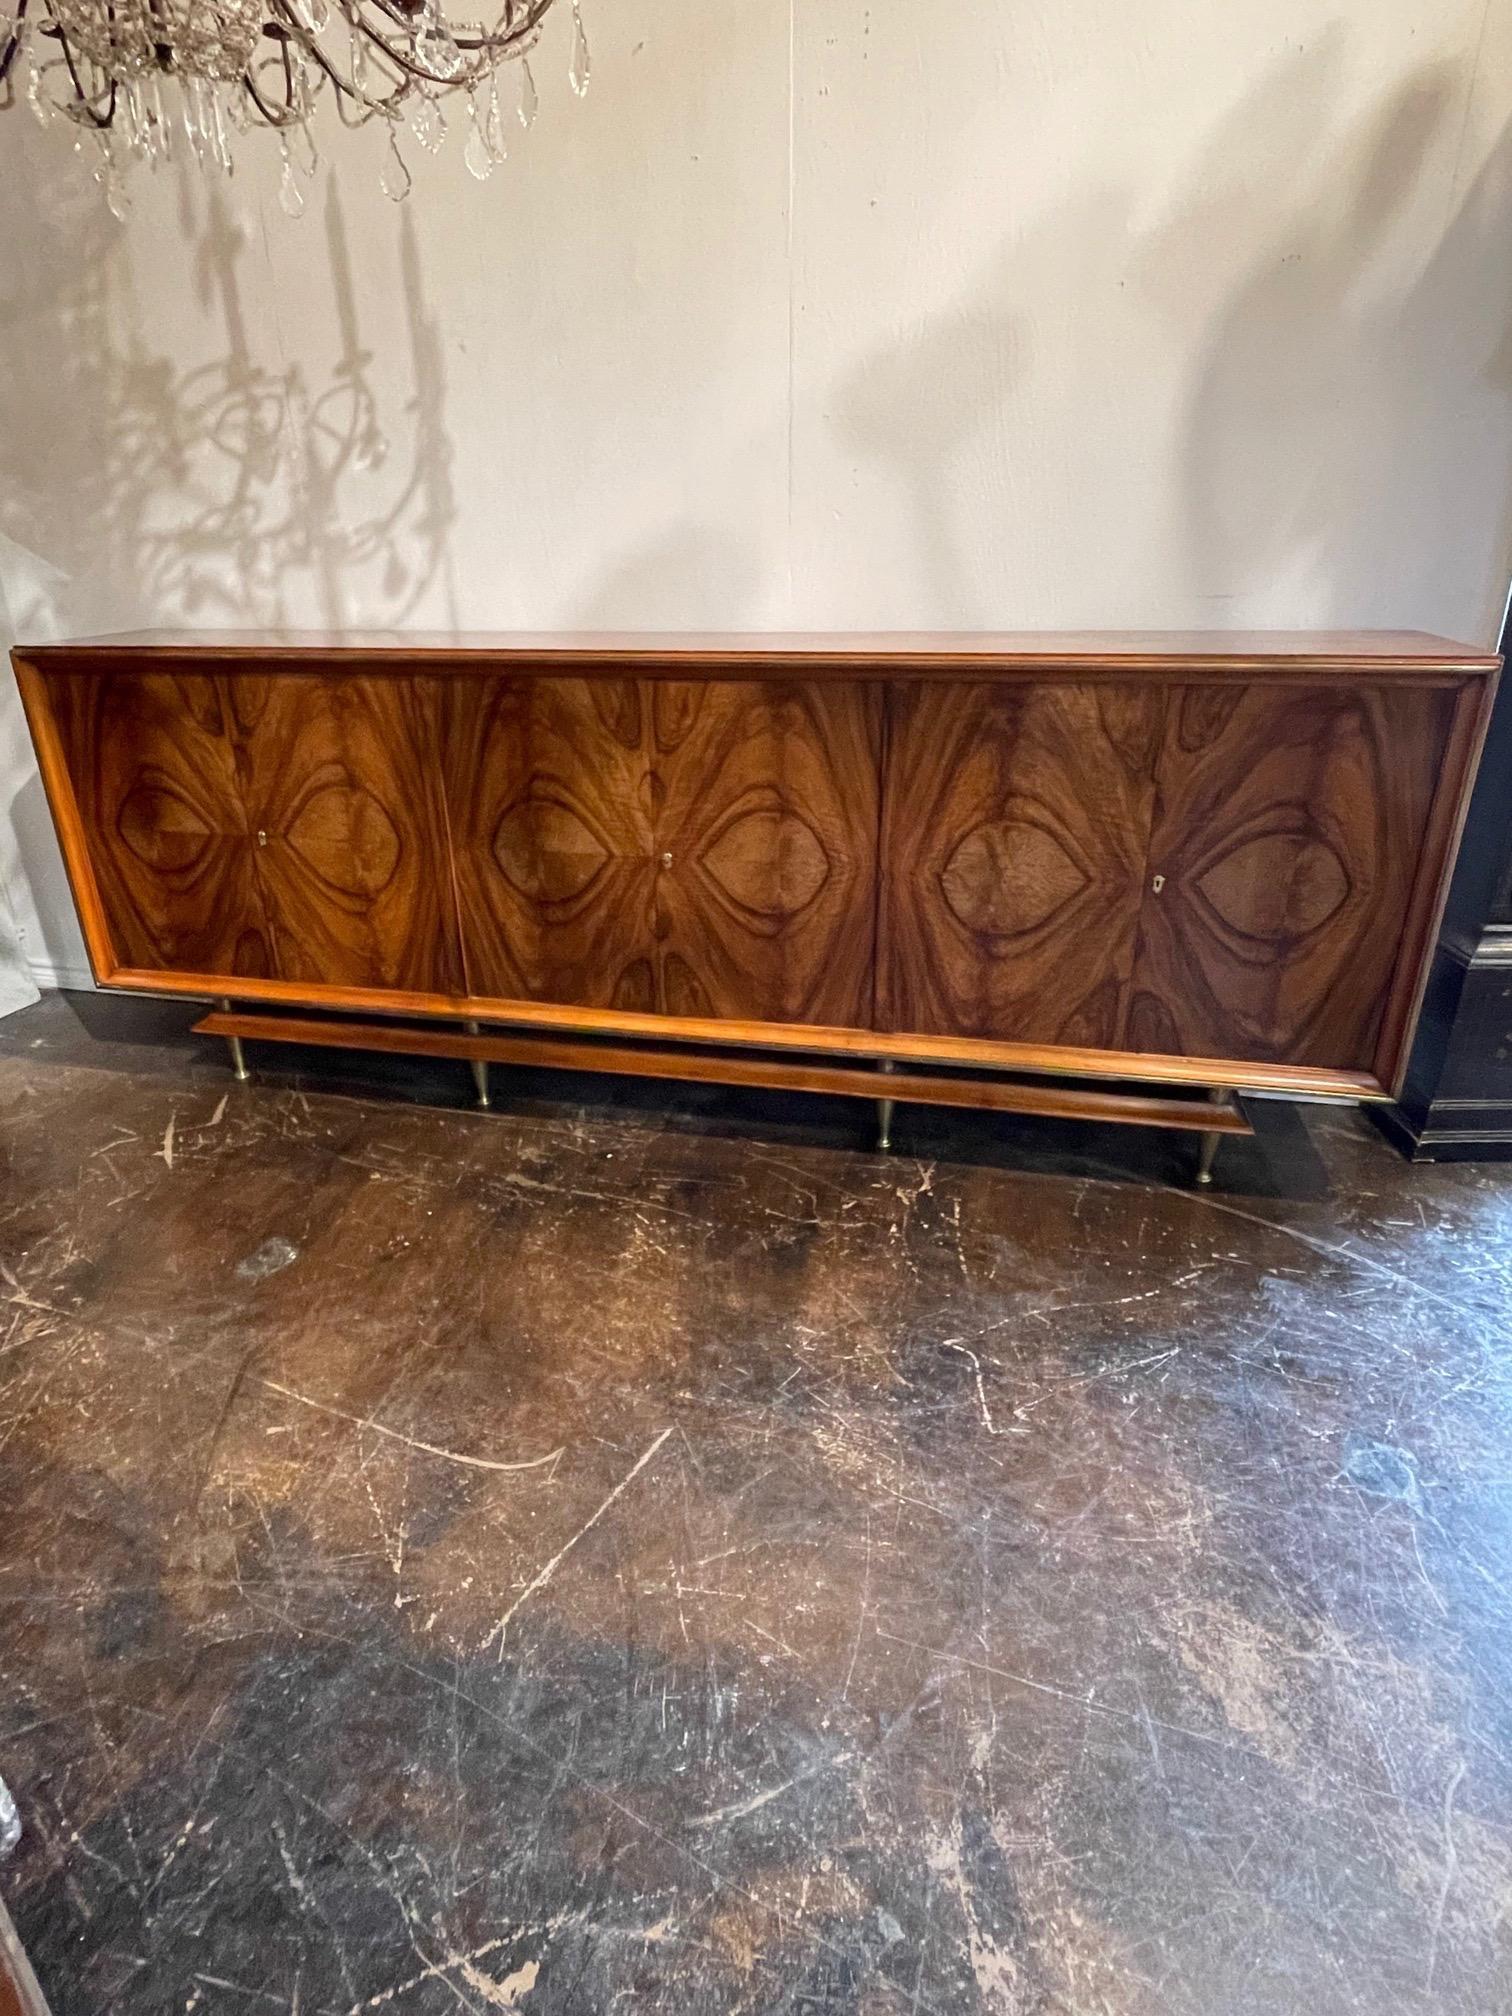 Exceptional mid-century large scale Italian black walnut and brass sideboard. This beautiful piece has an amazing matched veneer pattern. An exquisite server with tons of storage that creates a very high end look. Stunning!!